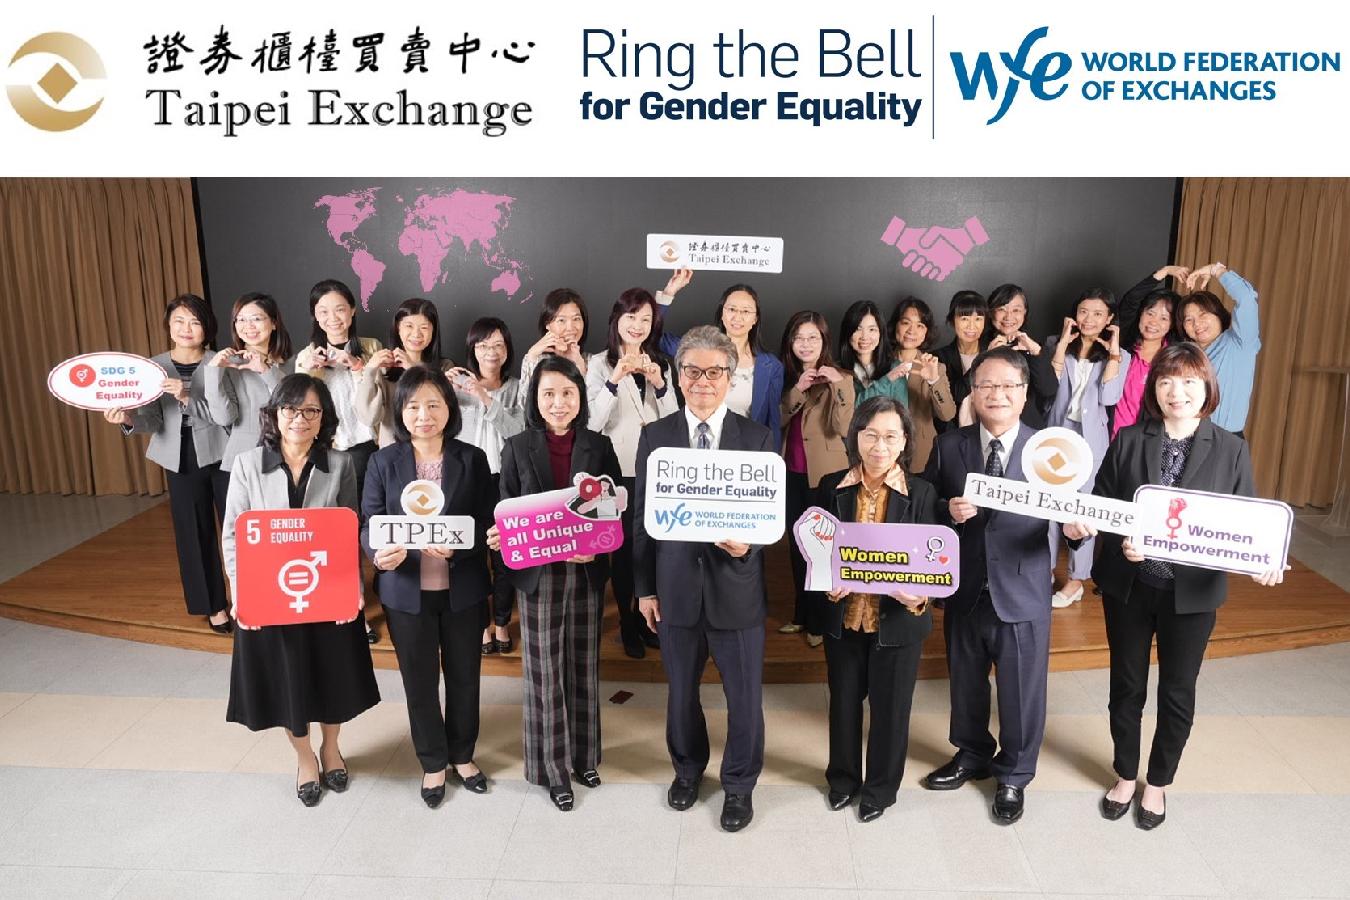 Taipei Exchange  (TPEx)  is  proud to join  the  global  event,  "Ring  the  Bell  for Gender Equality  2024".  This event, coordinated by the World Federation of Exchanges (WFE), International Finance Corporation (IFC) of the World Bank Group, the Sustainable Stock Exchanges Initiative (SSE), United Nations Global Compact, and UN Women, aims to raise awareness of the importance of gender equality and women's empowerment.